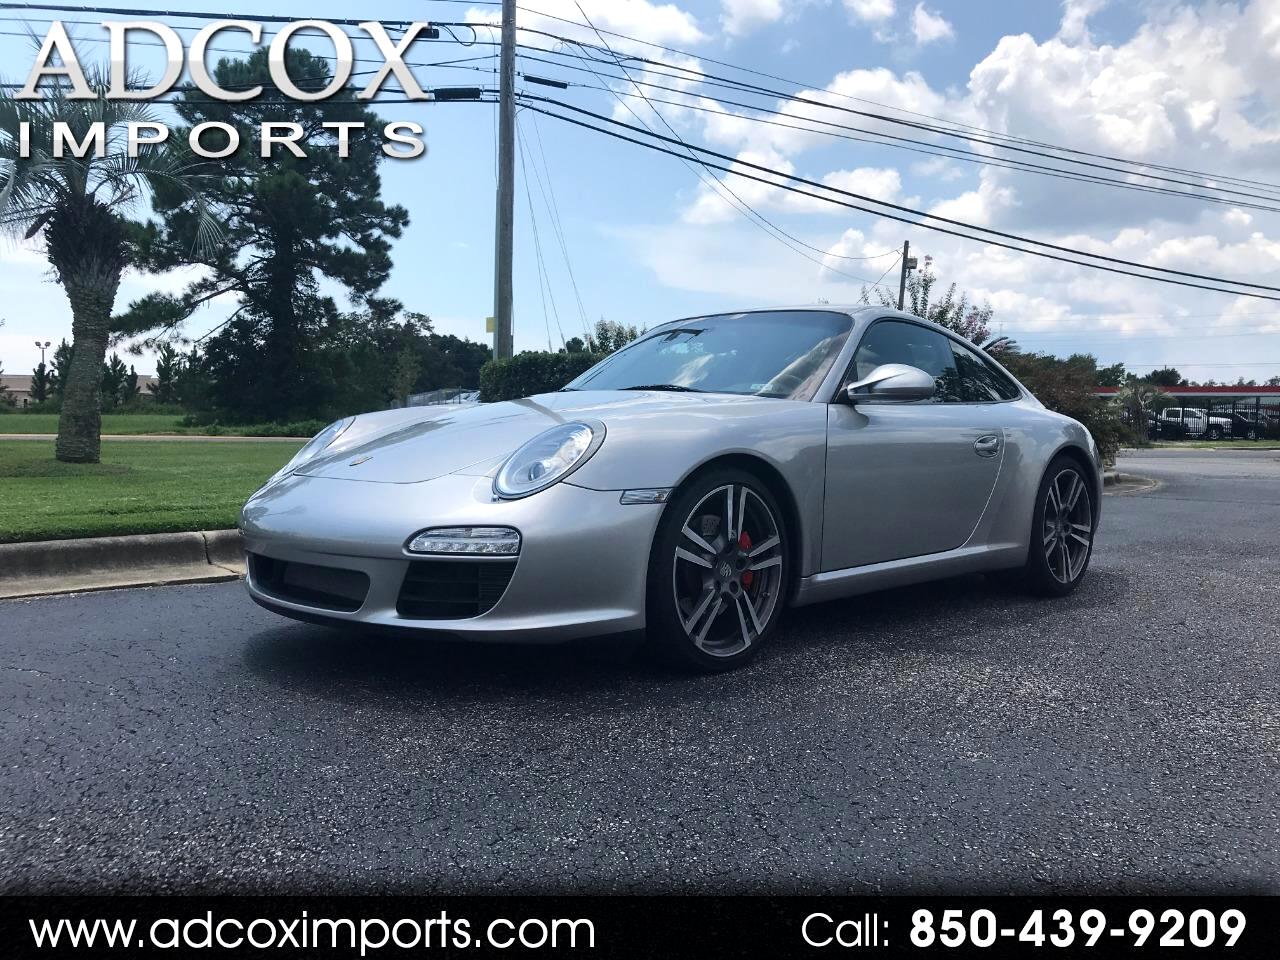 Used 2011 Porsche 911 Carrera S Coupe For Sale In Pensacola